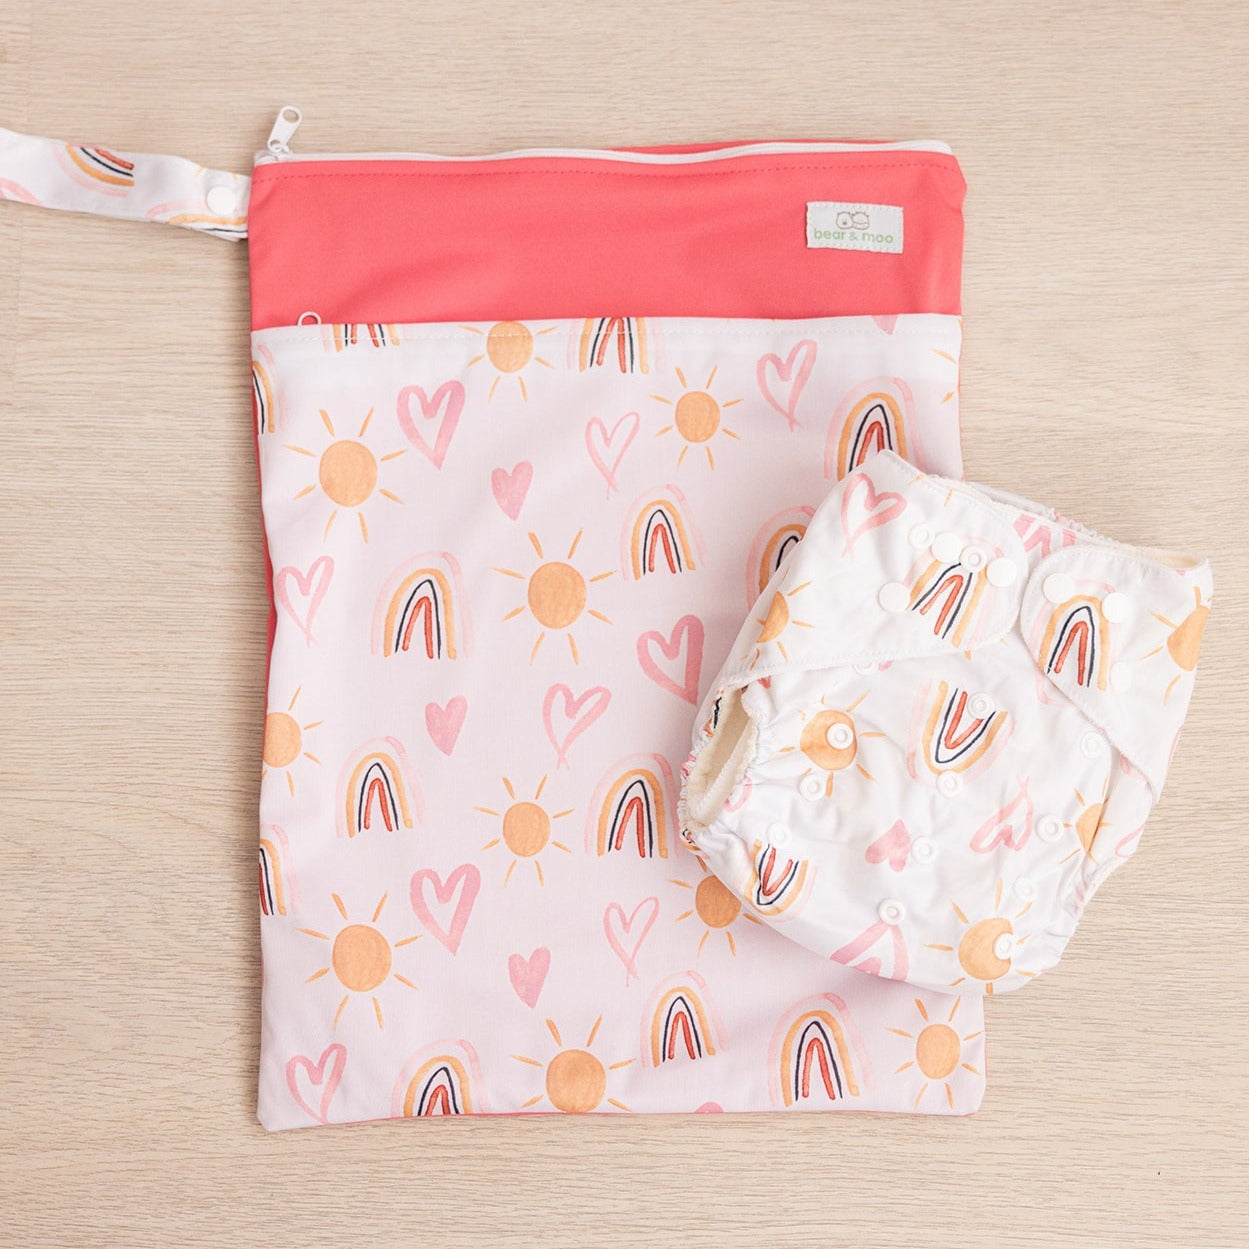 Bear & Moo Reusable Cloth Nappy | One Size Fits Most in Sunny Days print